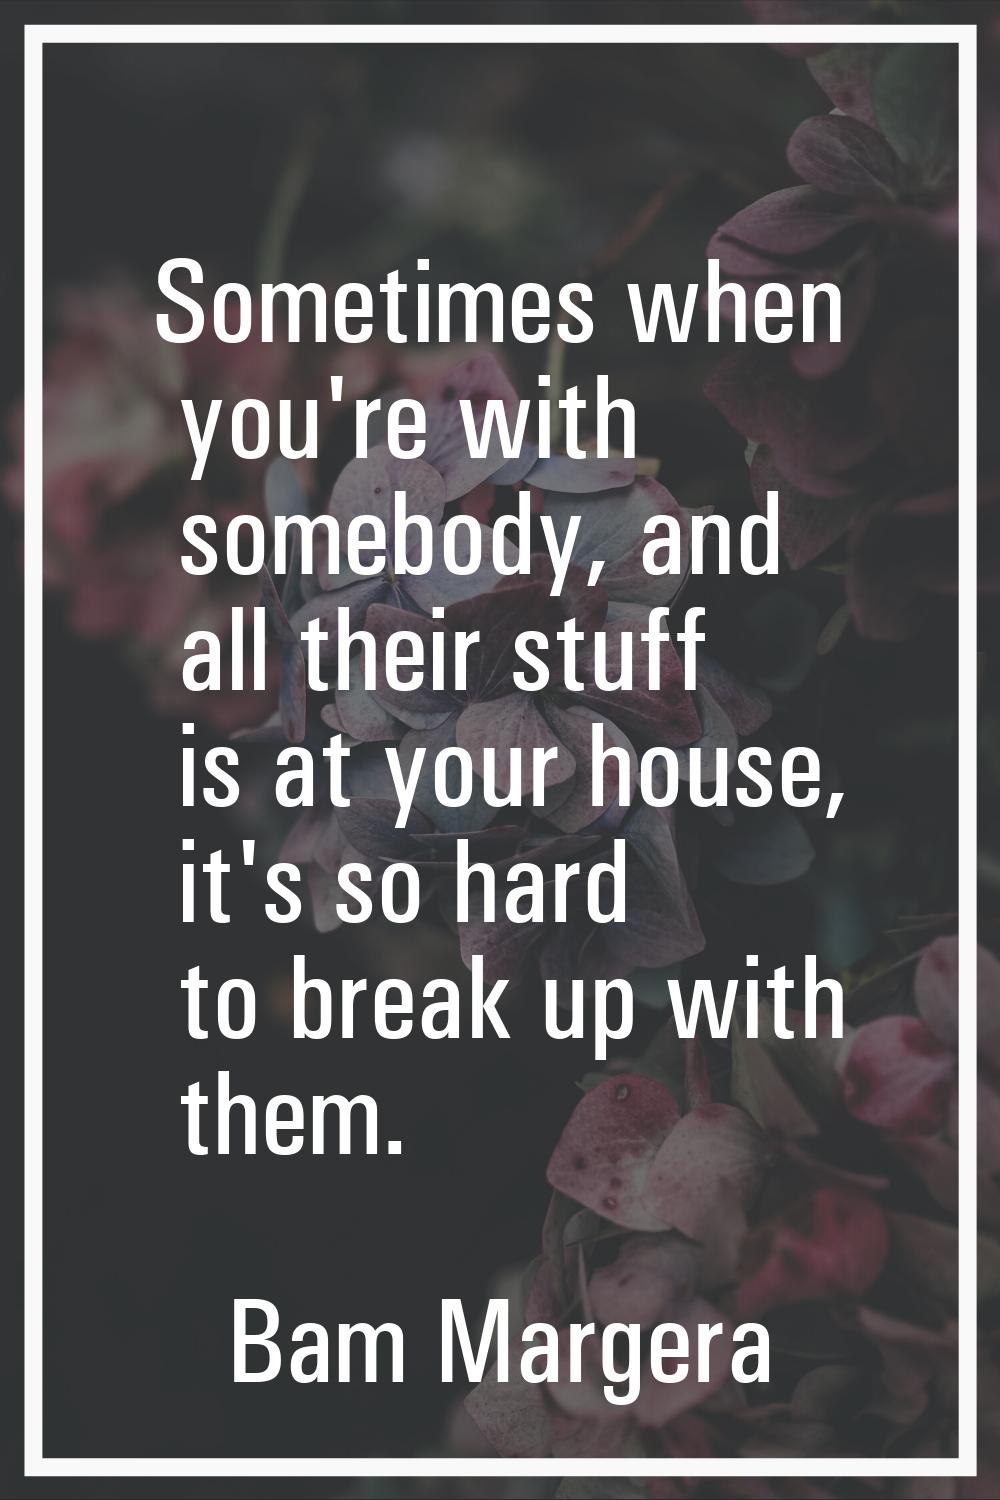 Sometimes when you're with somebody, and all their stuff is at your house, it's so hard to break up